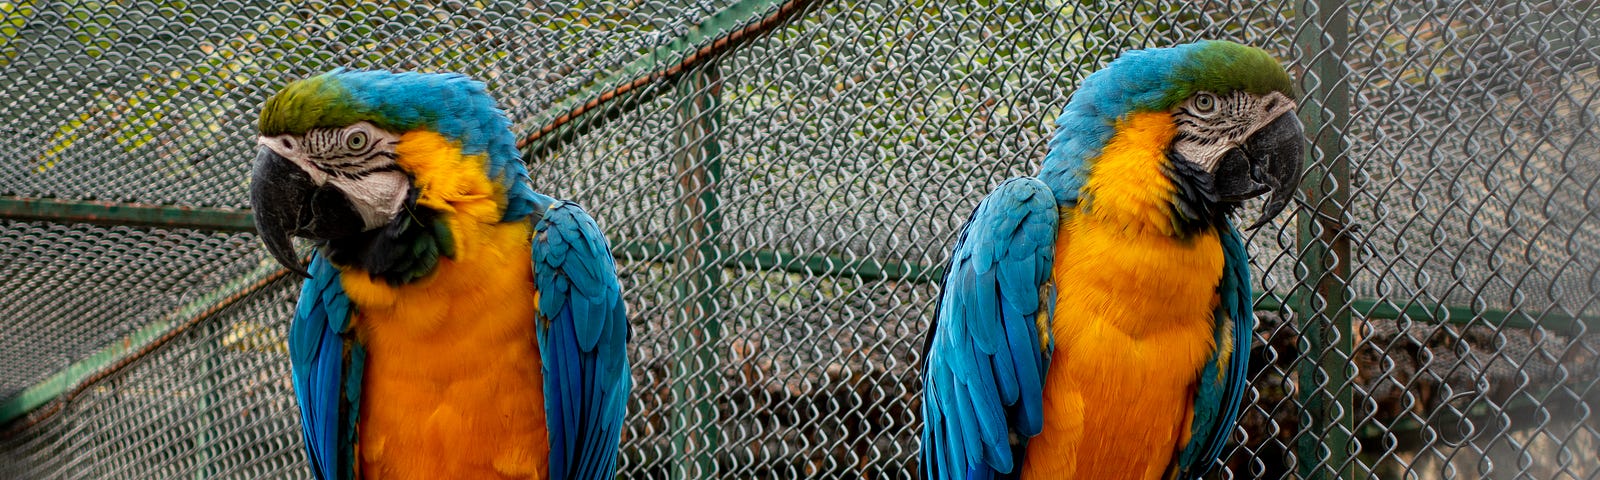 Two colorful parrots facing away from each other